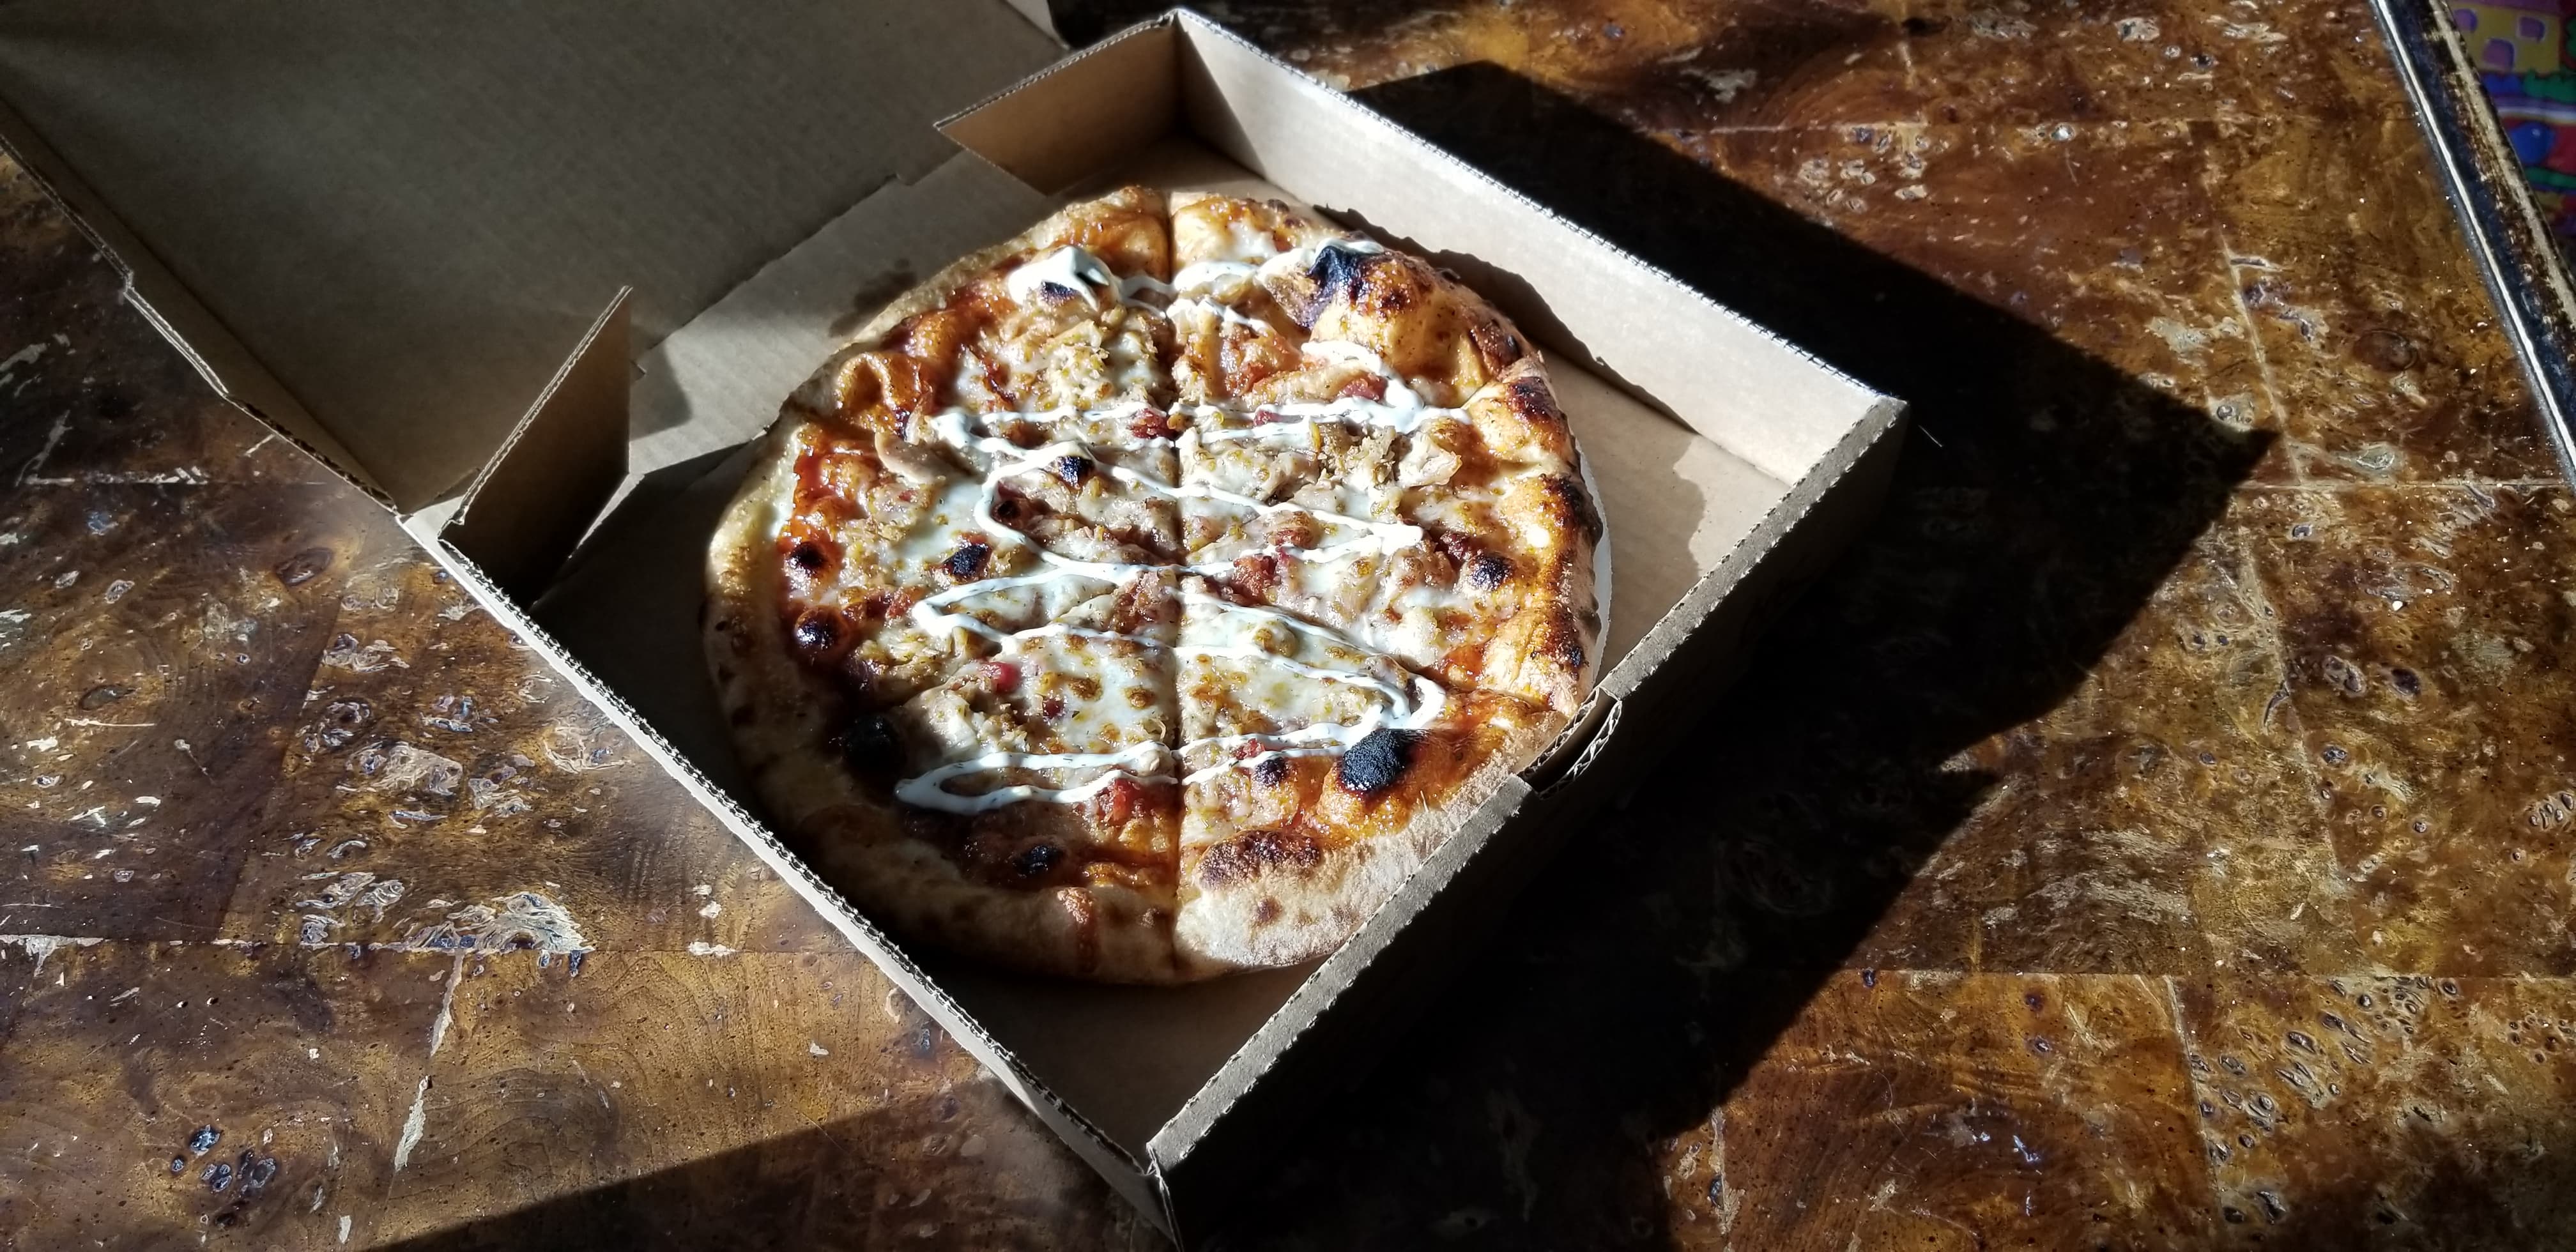 On a sunny table, there is a full pizza pie of BBQ chicken ranch pizza. Photo by Nina Hopkins.